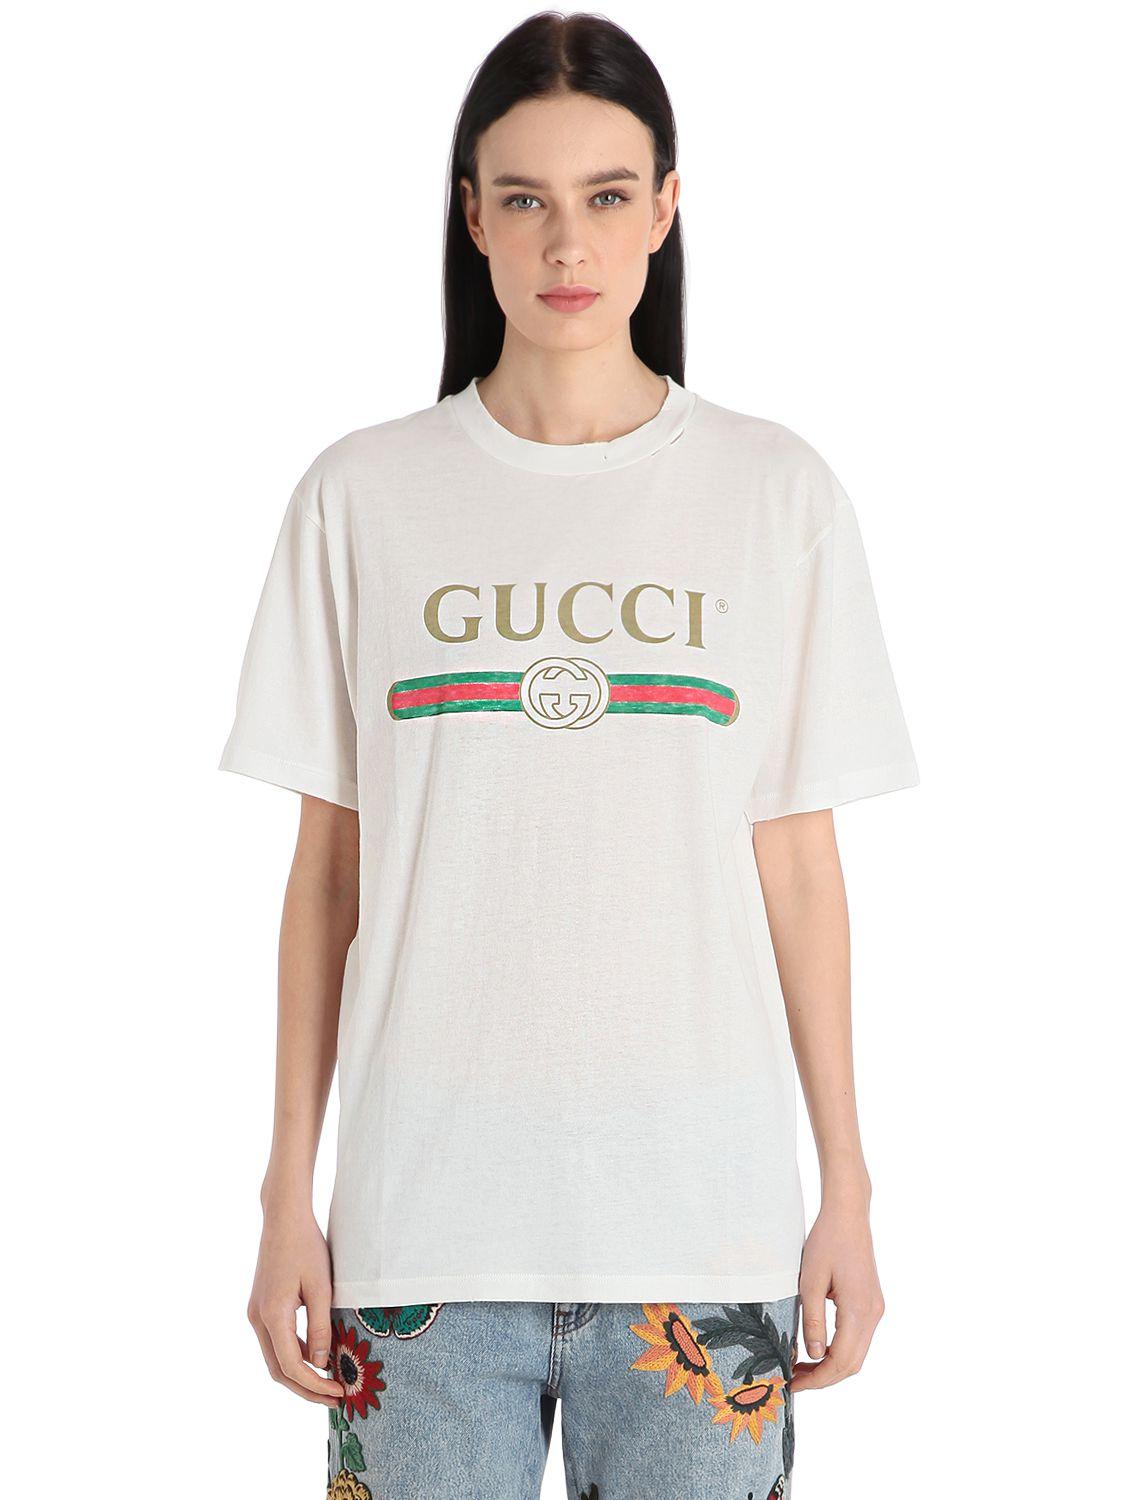 Gucci T Shirt : Gucci GG Logo Print T-shirt in Red for Men - Lyst / The ...